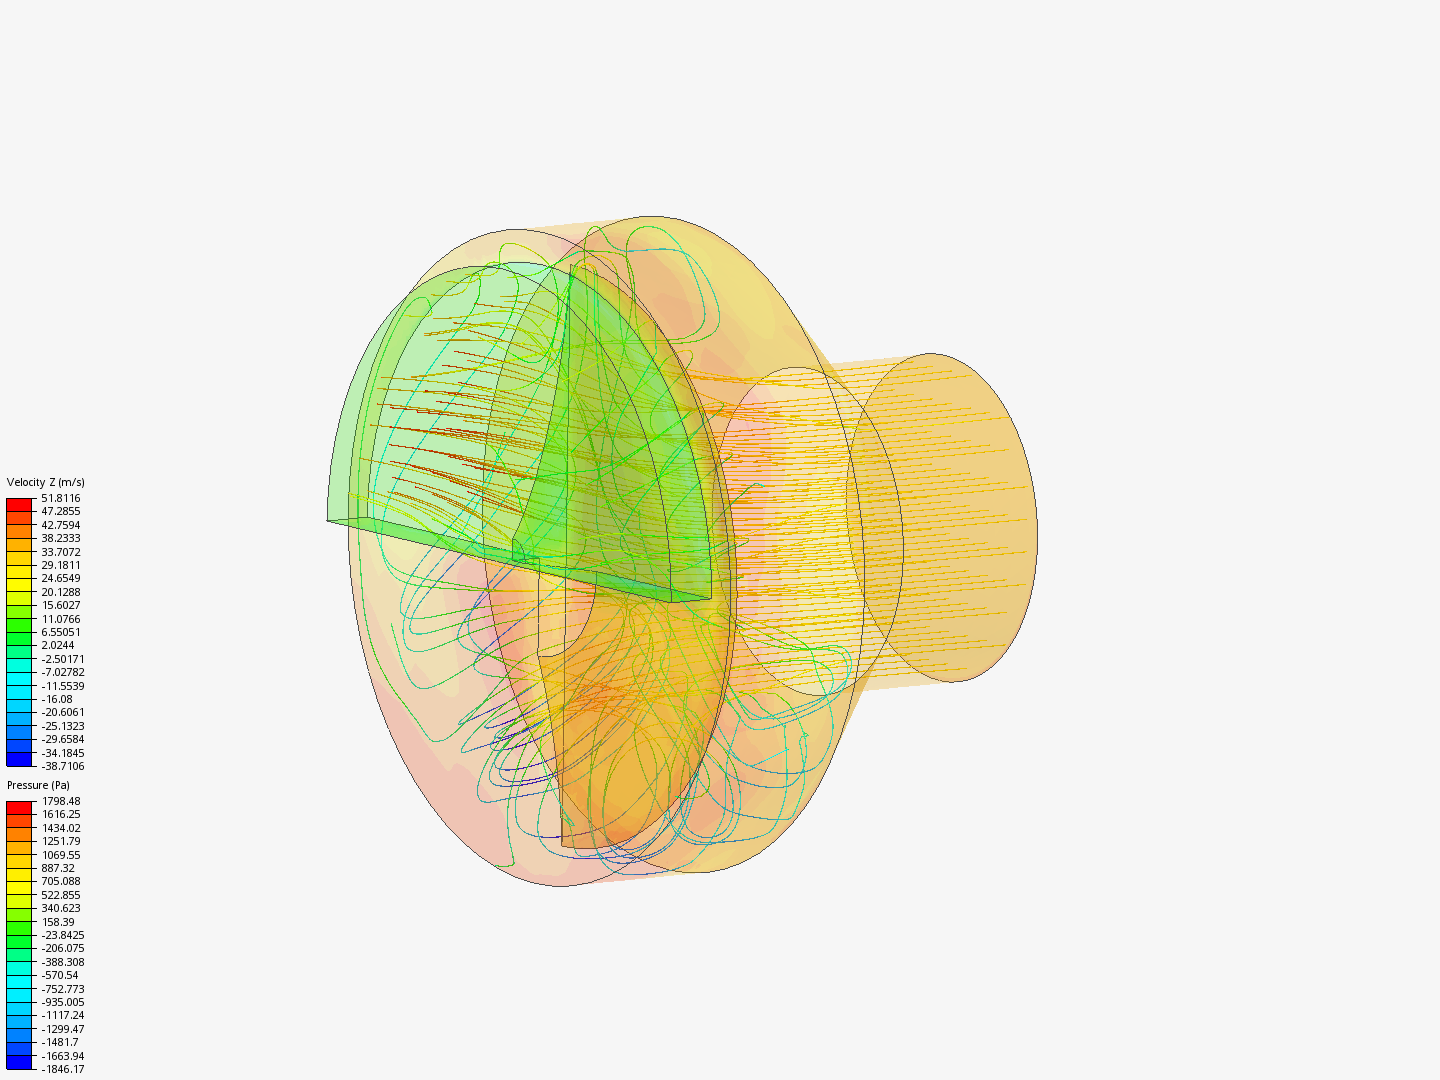 Resppy_v2.0_CFD_1 image